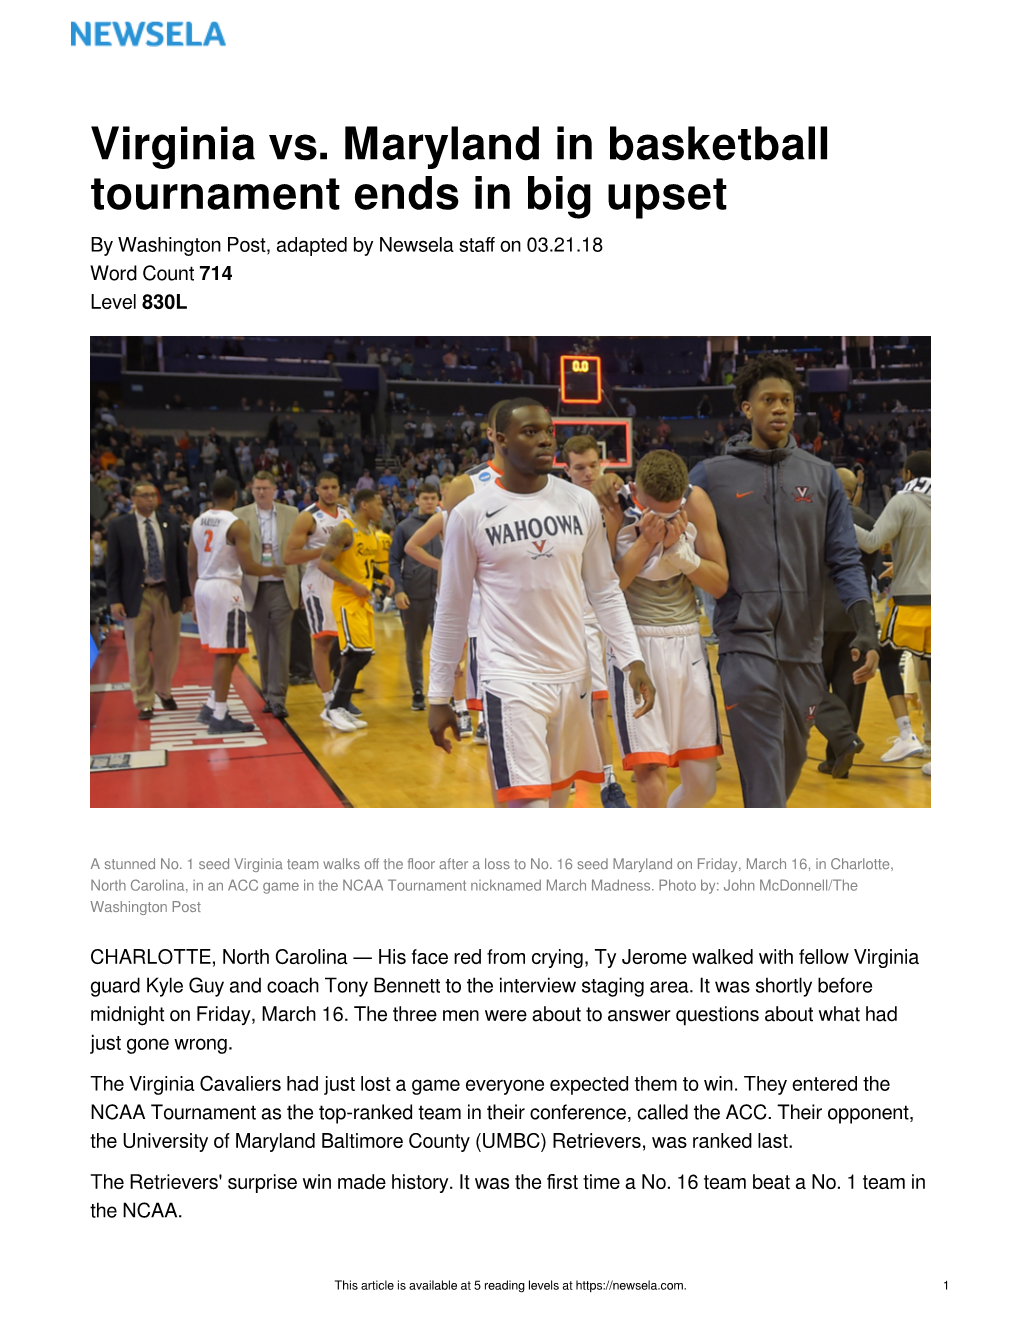 Virginia Vs. Maryland in Basketball Tournament Ends in Big Upset by Washington Post, Adapted by Newsela Staﬀ on 03.21.18 Word Count 714 Level 830L